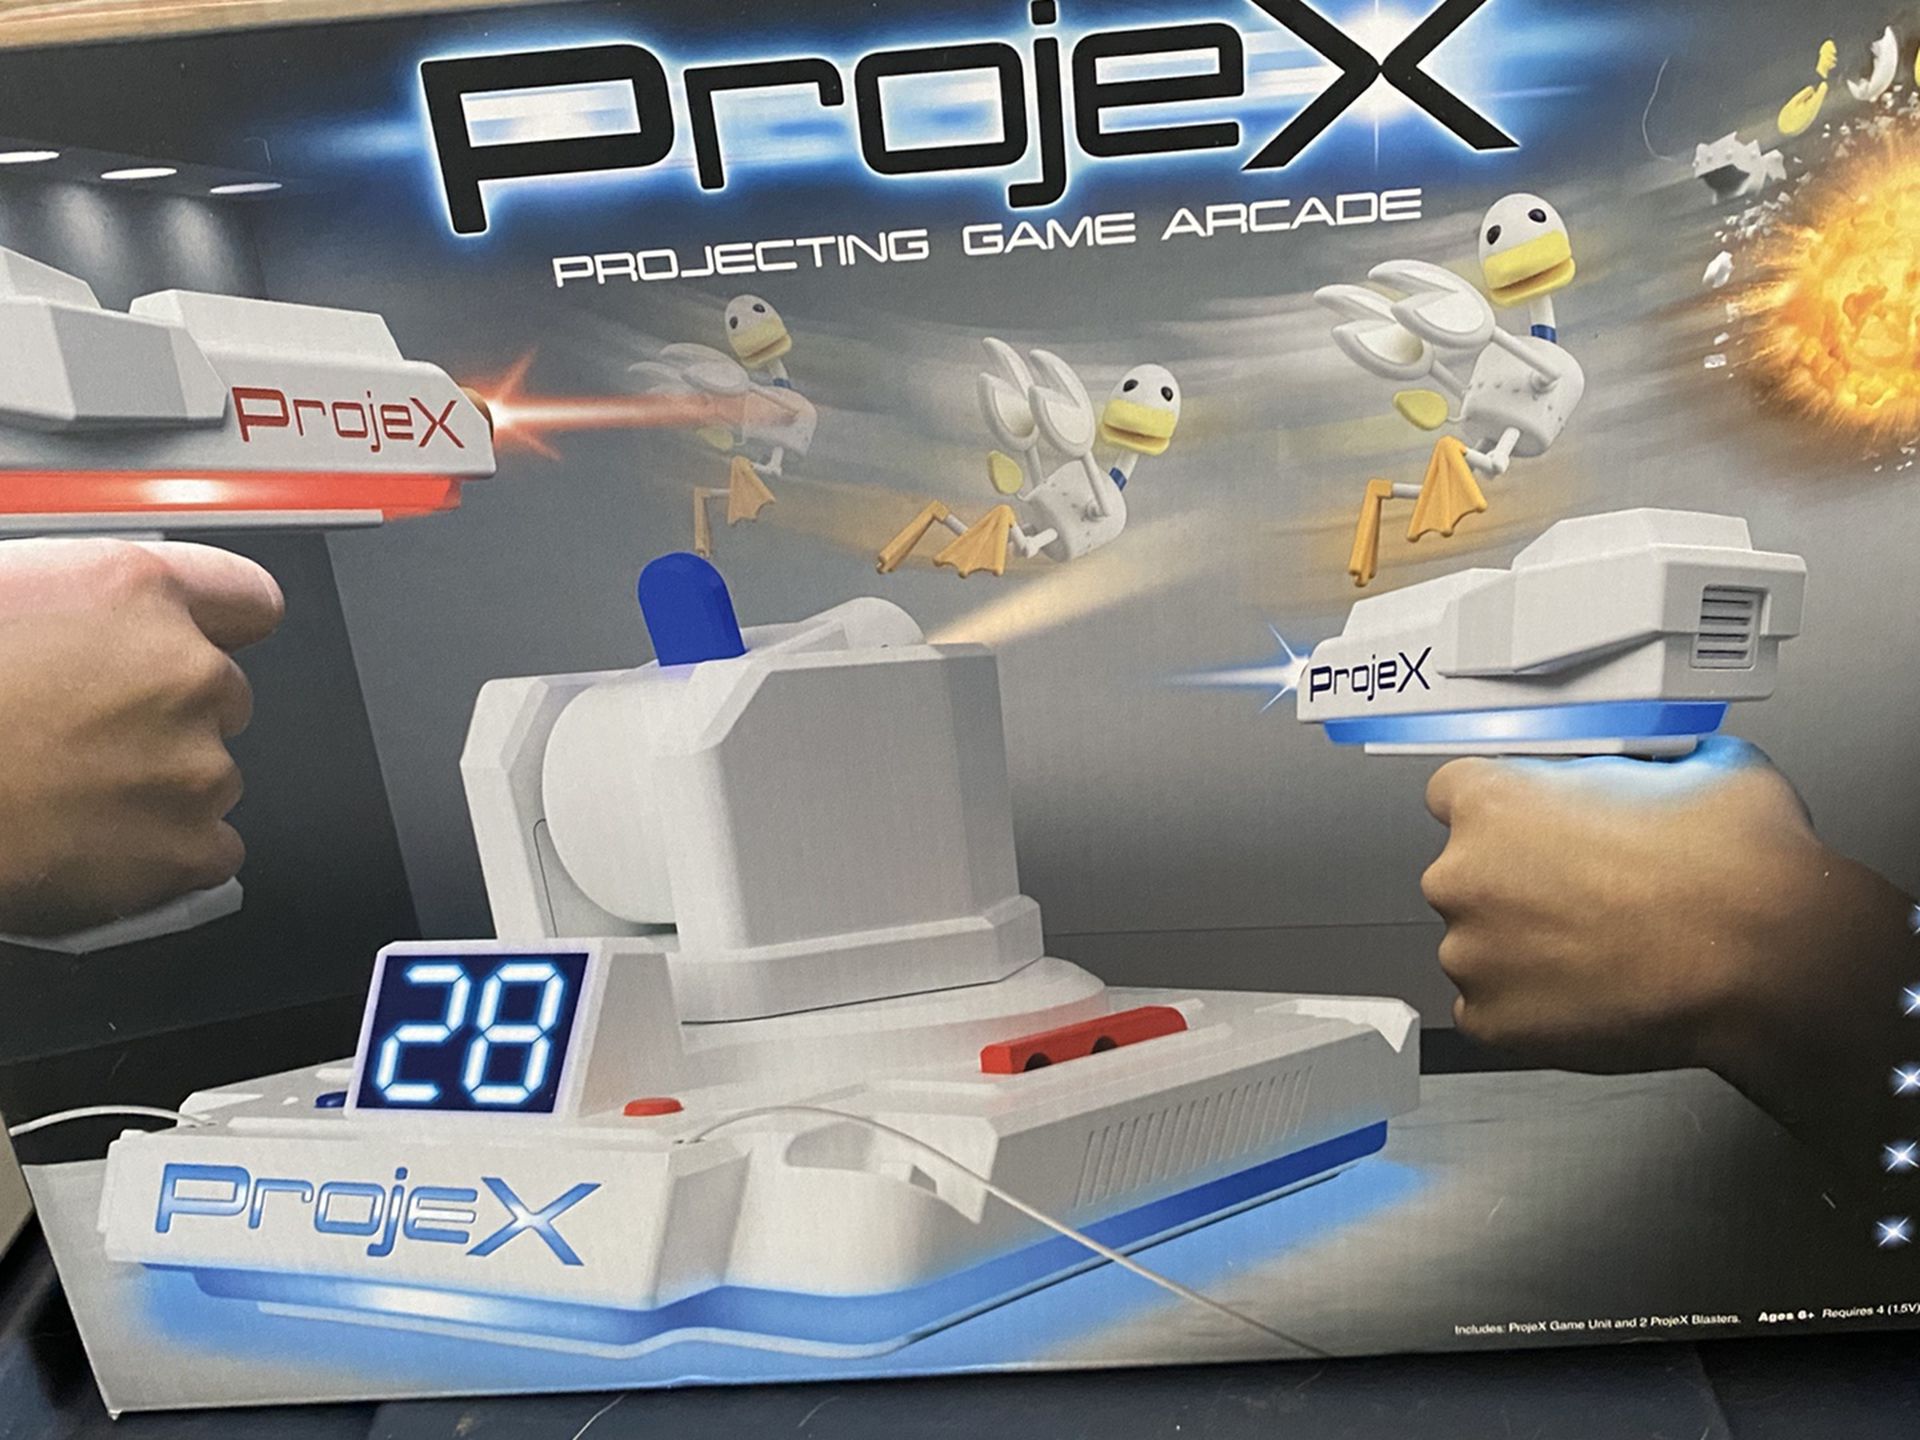 Projex Projecting Game Arcade